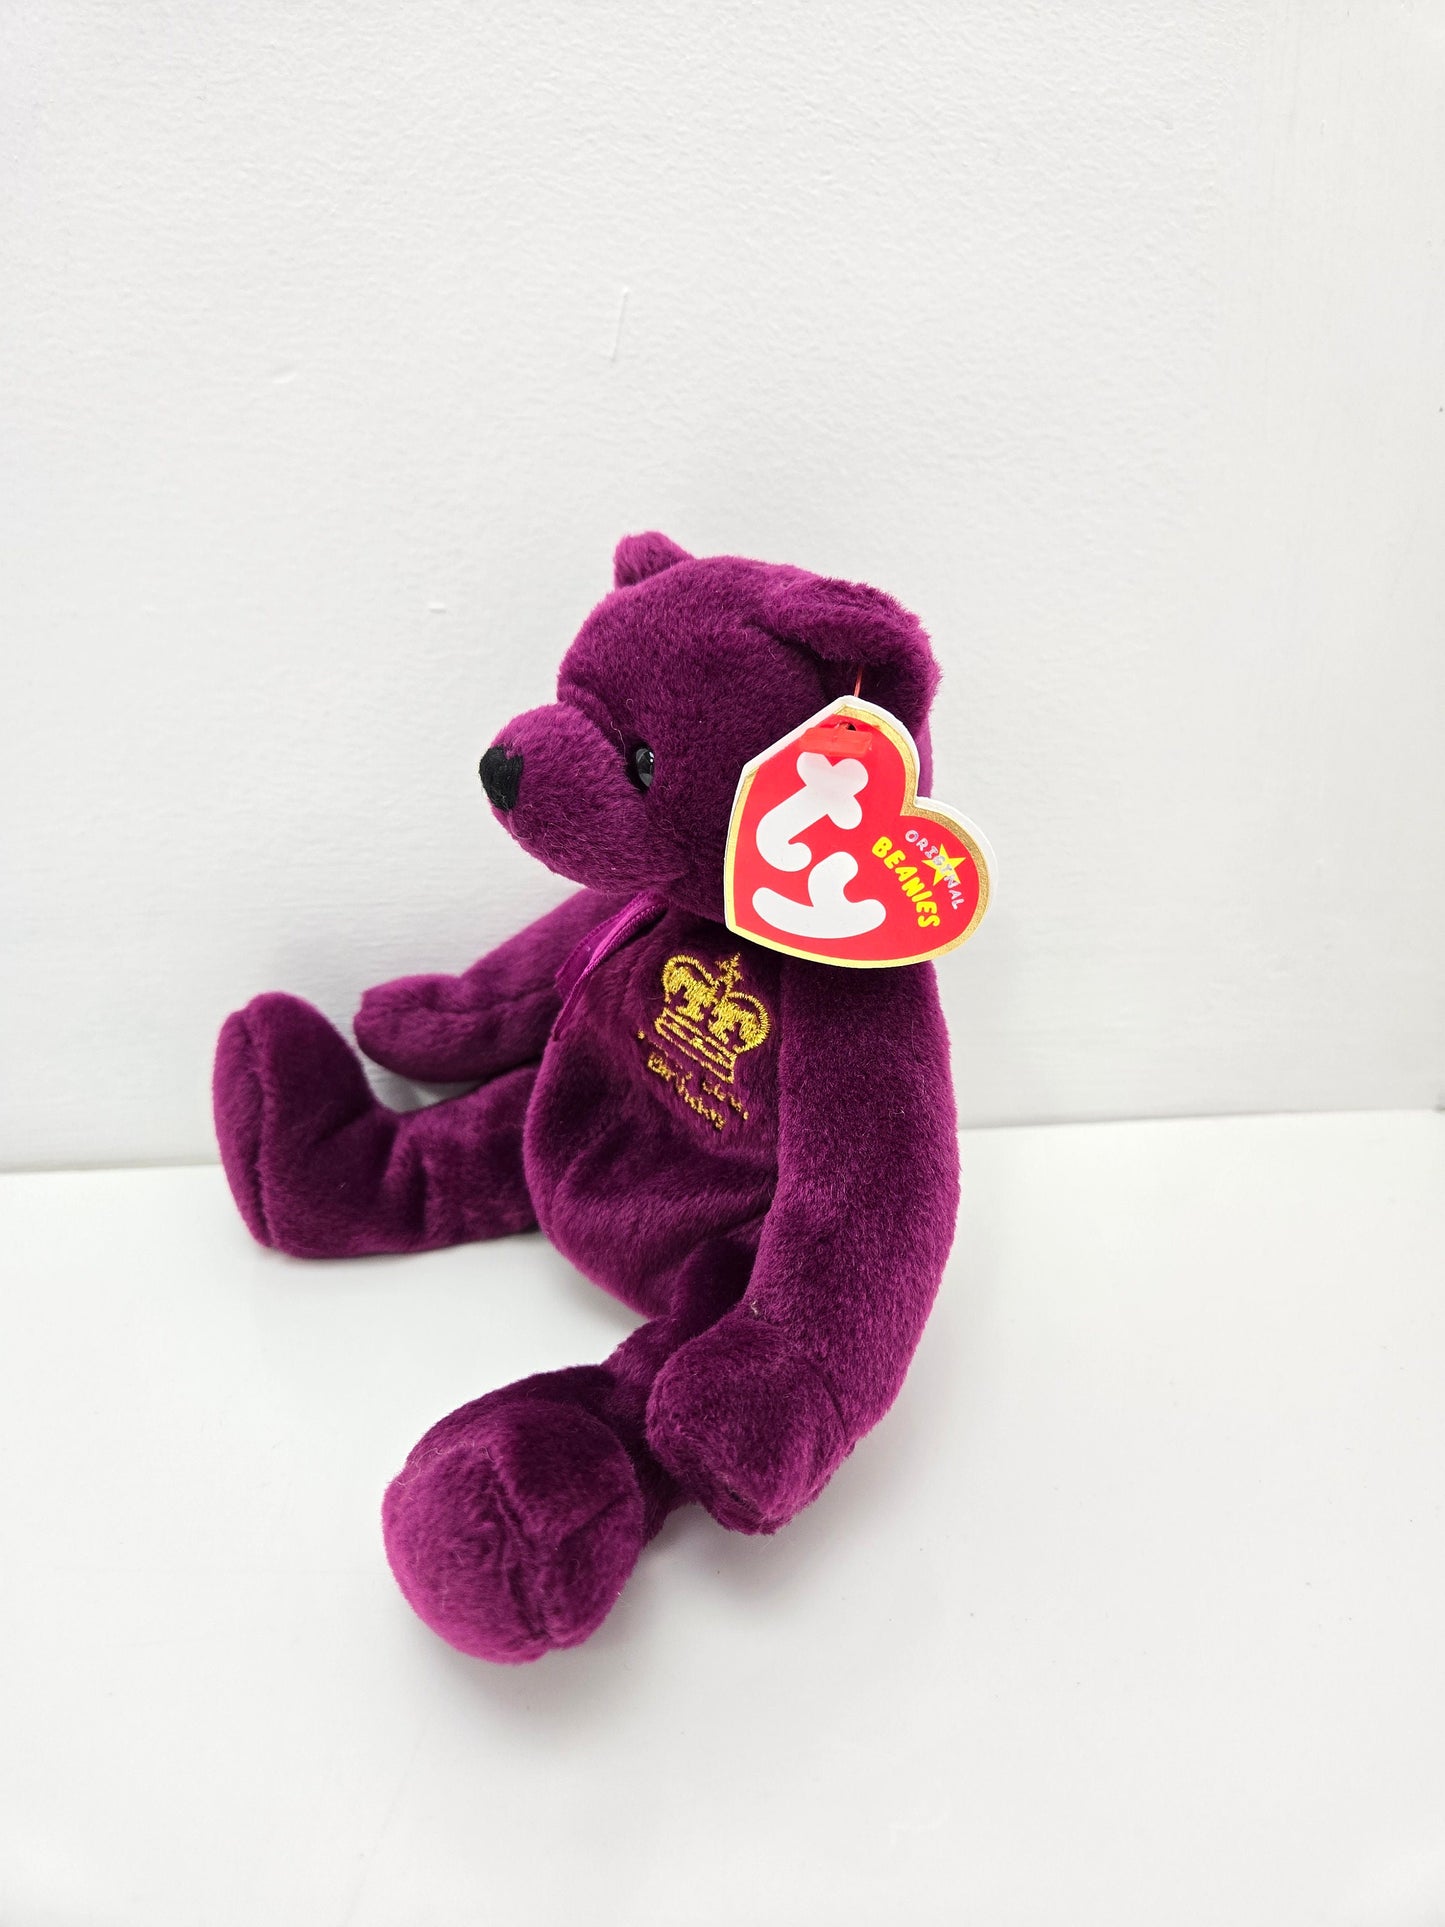 TY Beanie Baby “Majestic” the Bear - UK Exclusive *Rare* - Honouring the Queen’s 80th Birthday (7.5 inch)